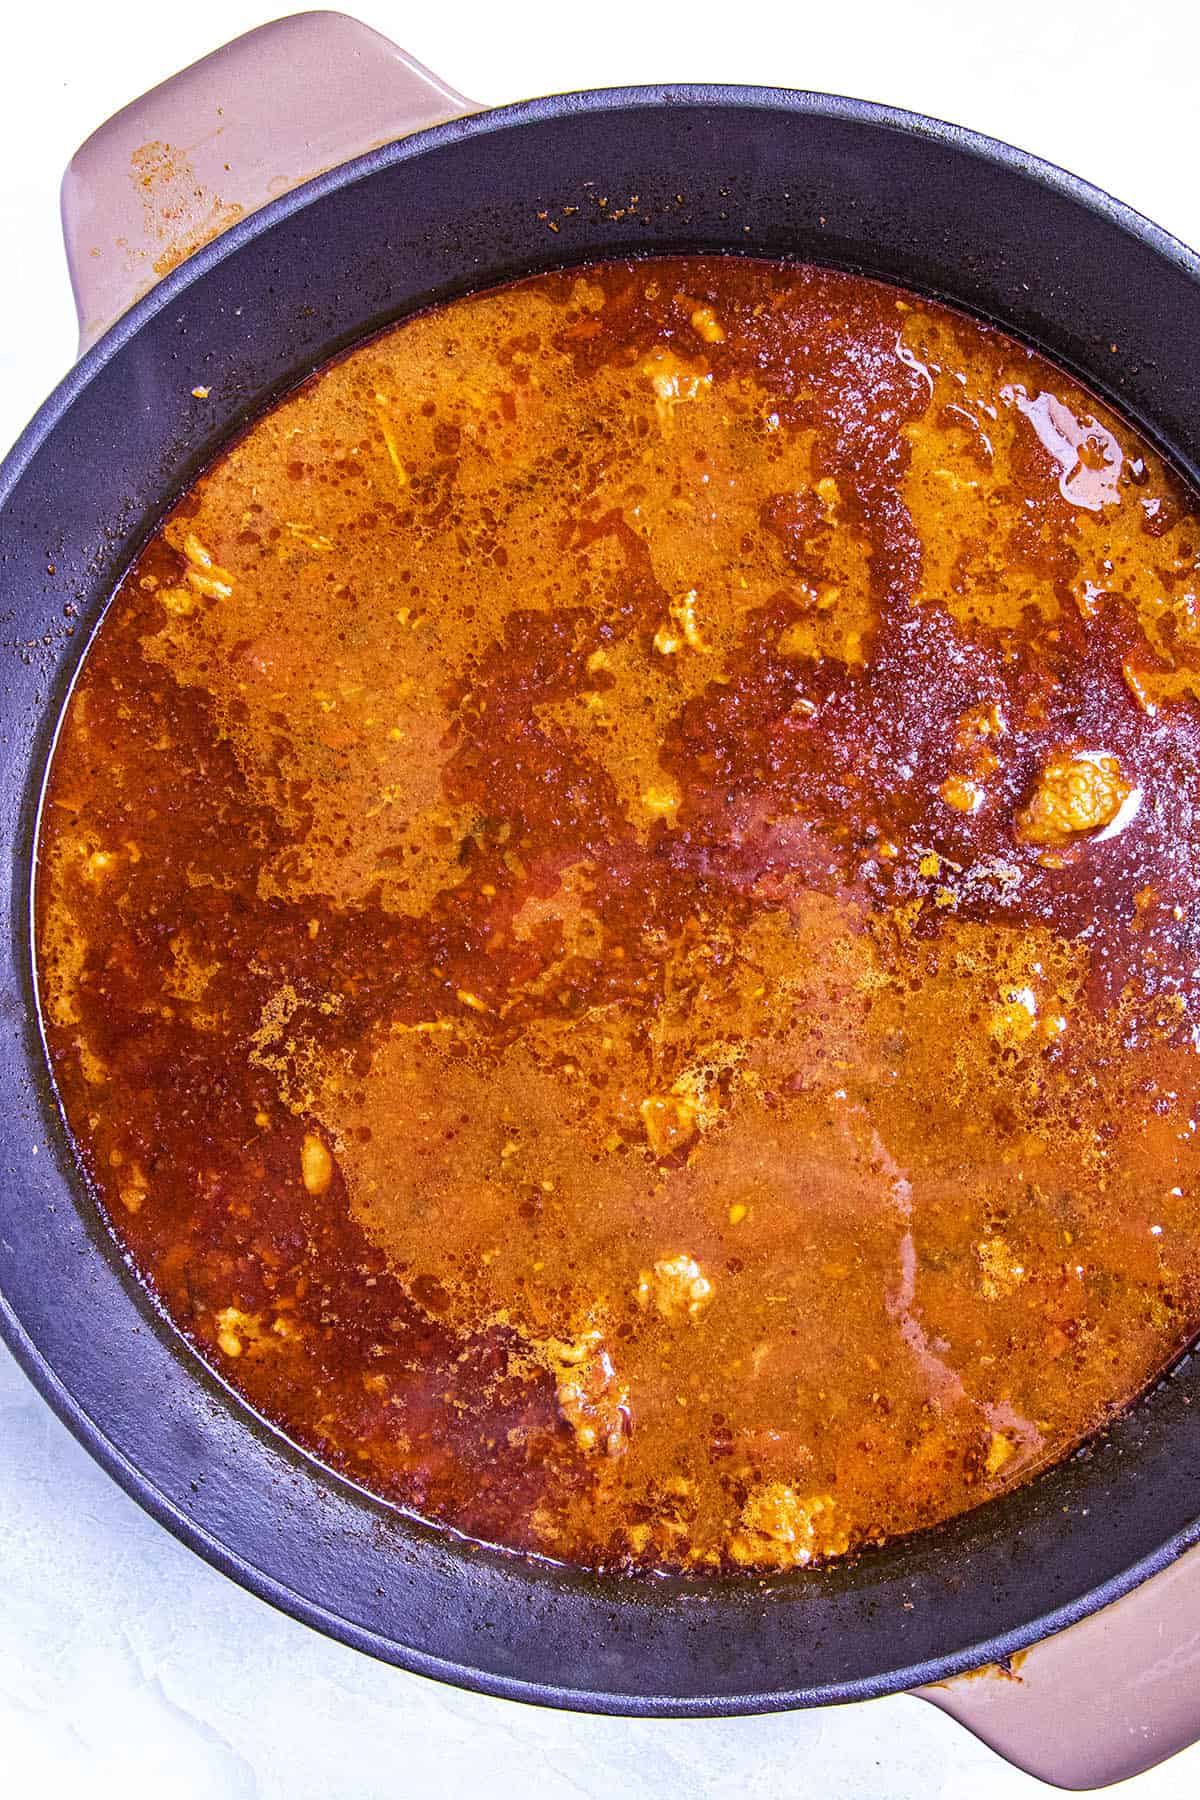 The first simmer of the meat in a large pot with chili paste and seasonings